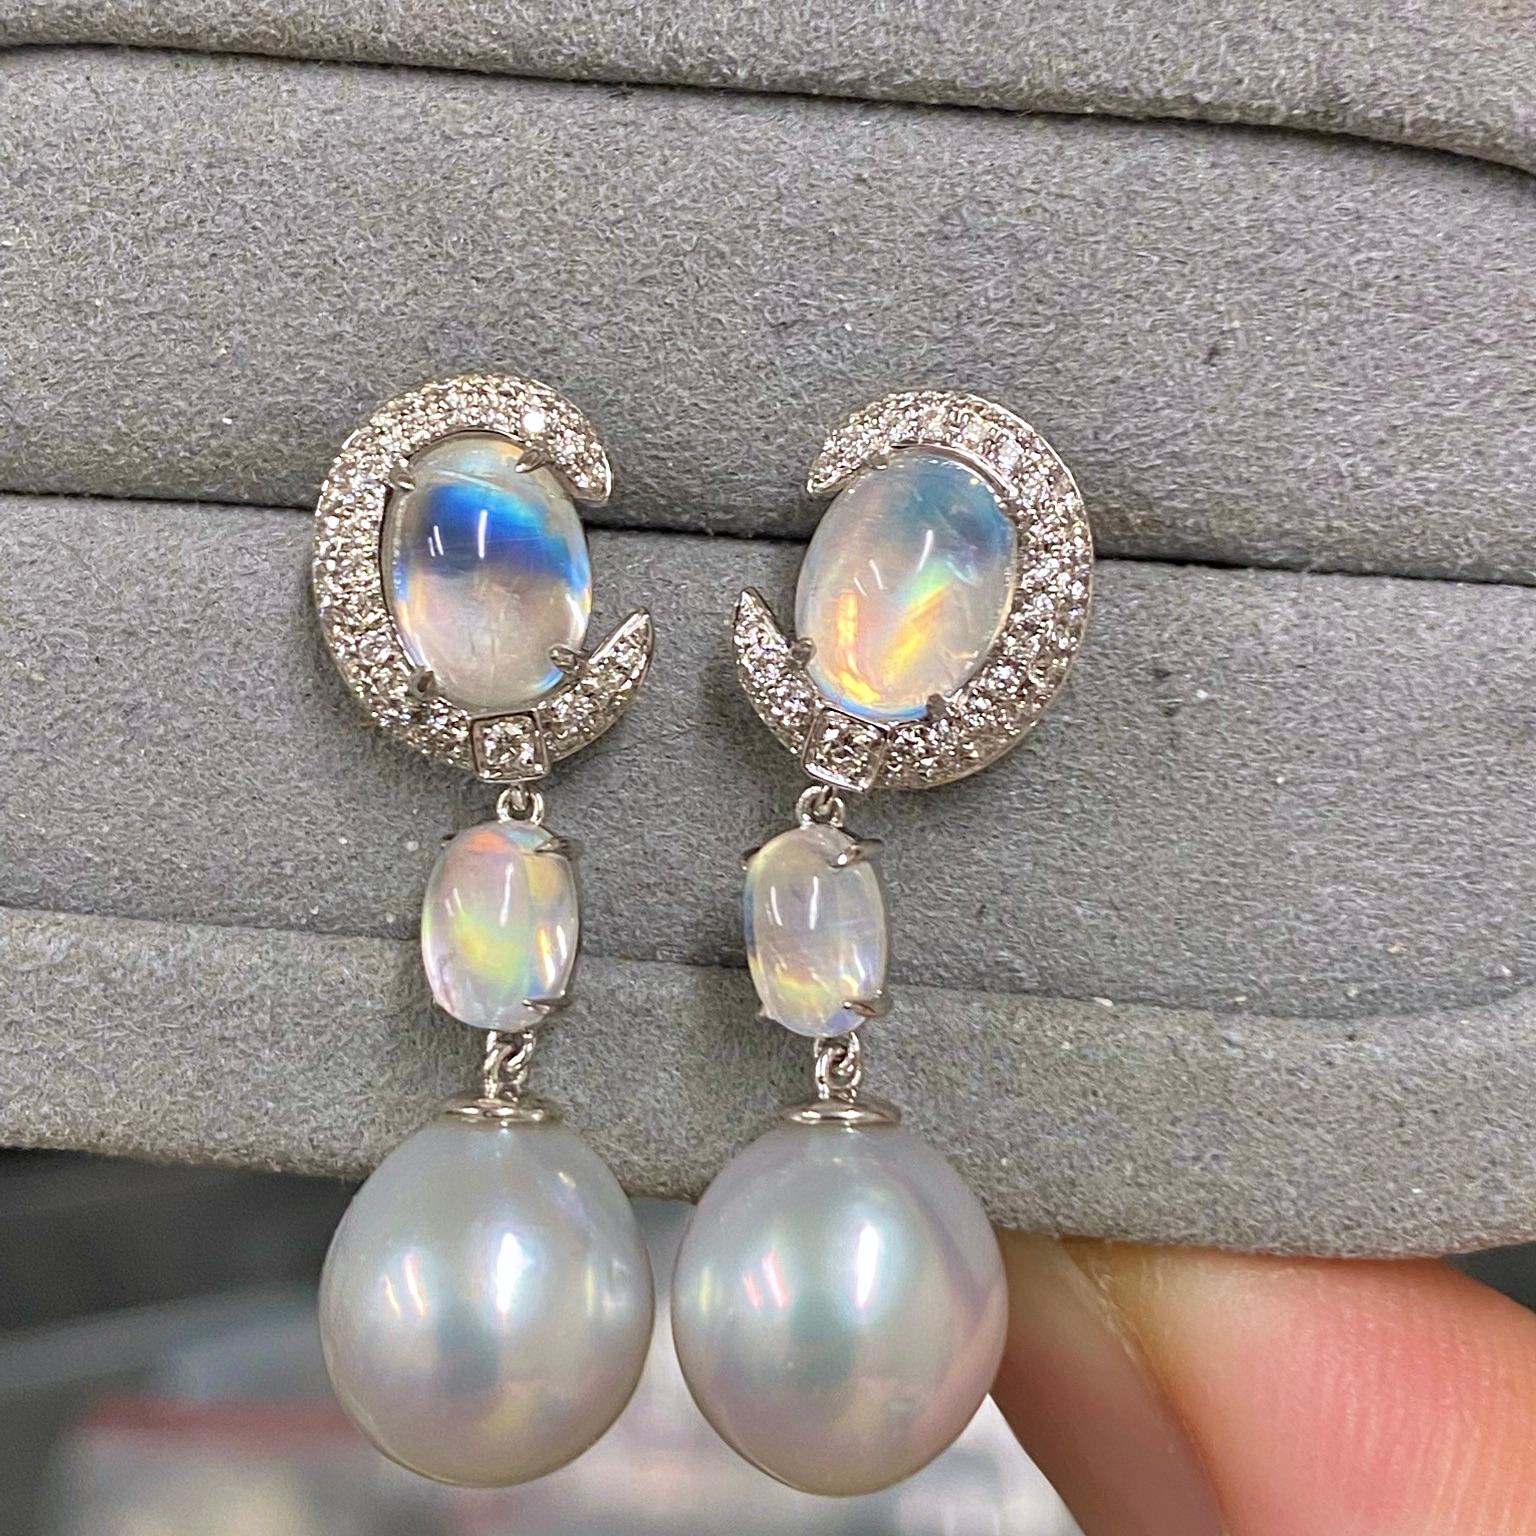 This earring in inspired by the Moonstones. The top part of the earring is a Moonstone engulfed by a Diamonds encrusted Moon Crescent followed by a Moonstone Cabochon and at the bottom dangling a White Australian South Sea Pearl. The base tone of